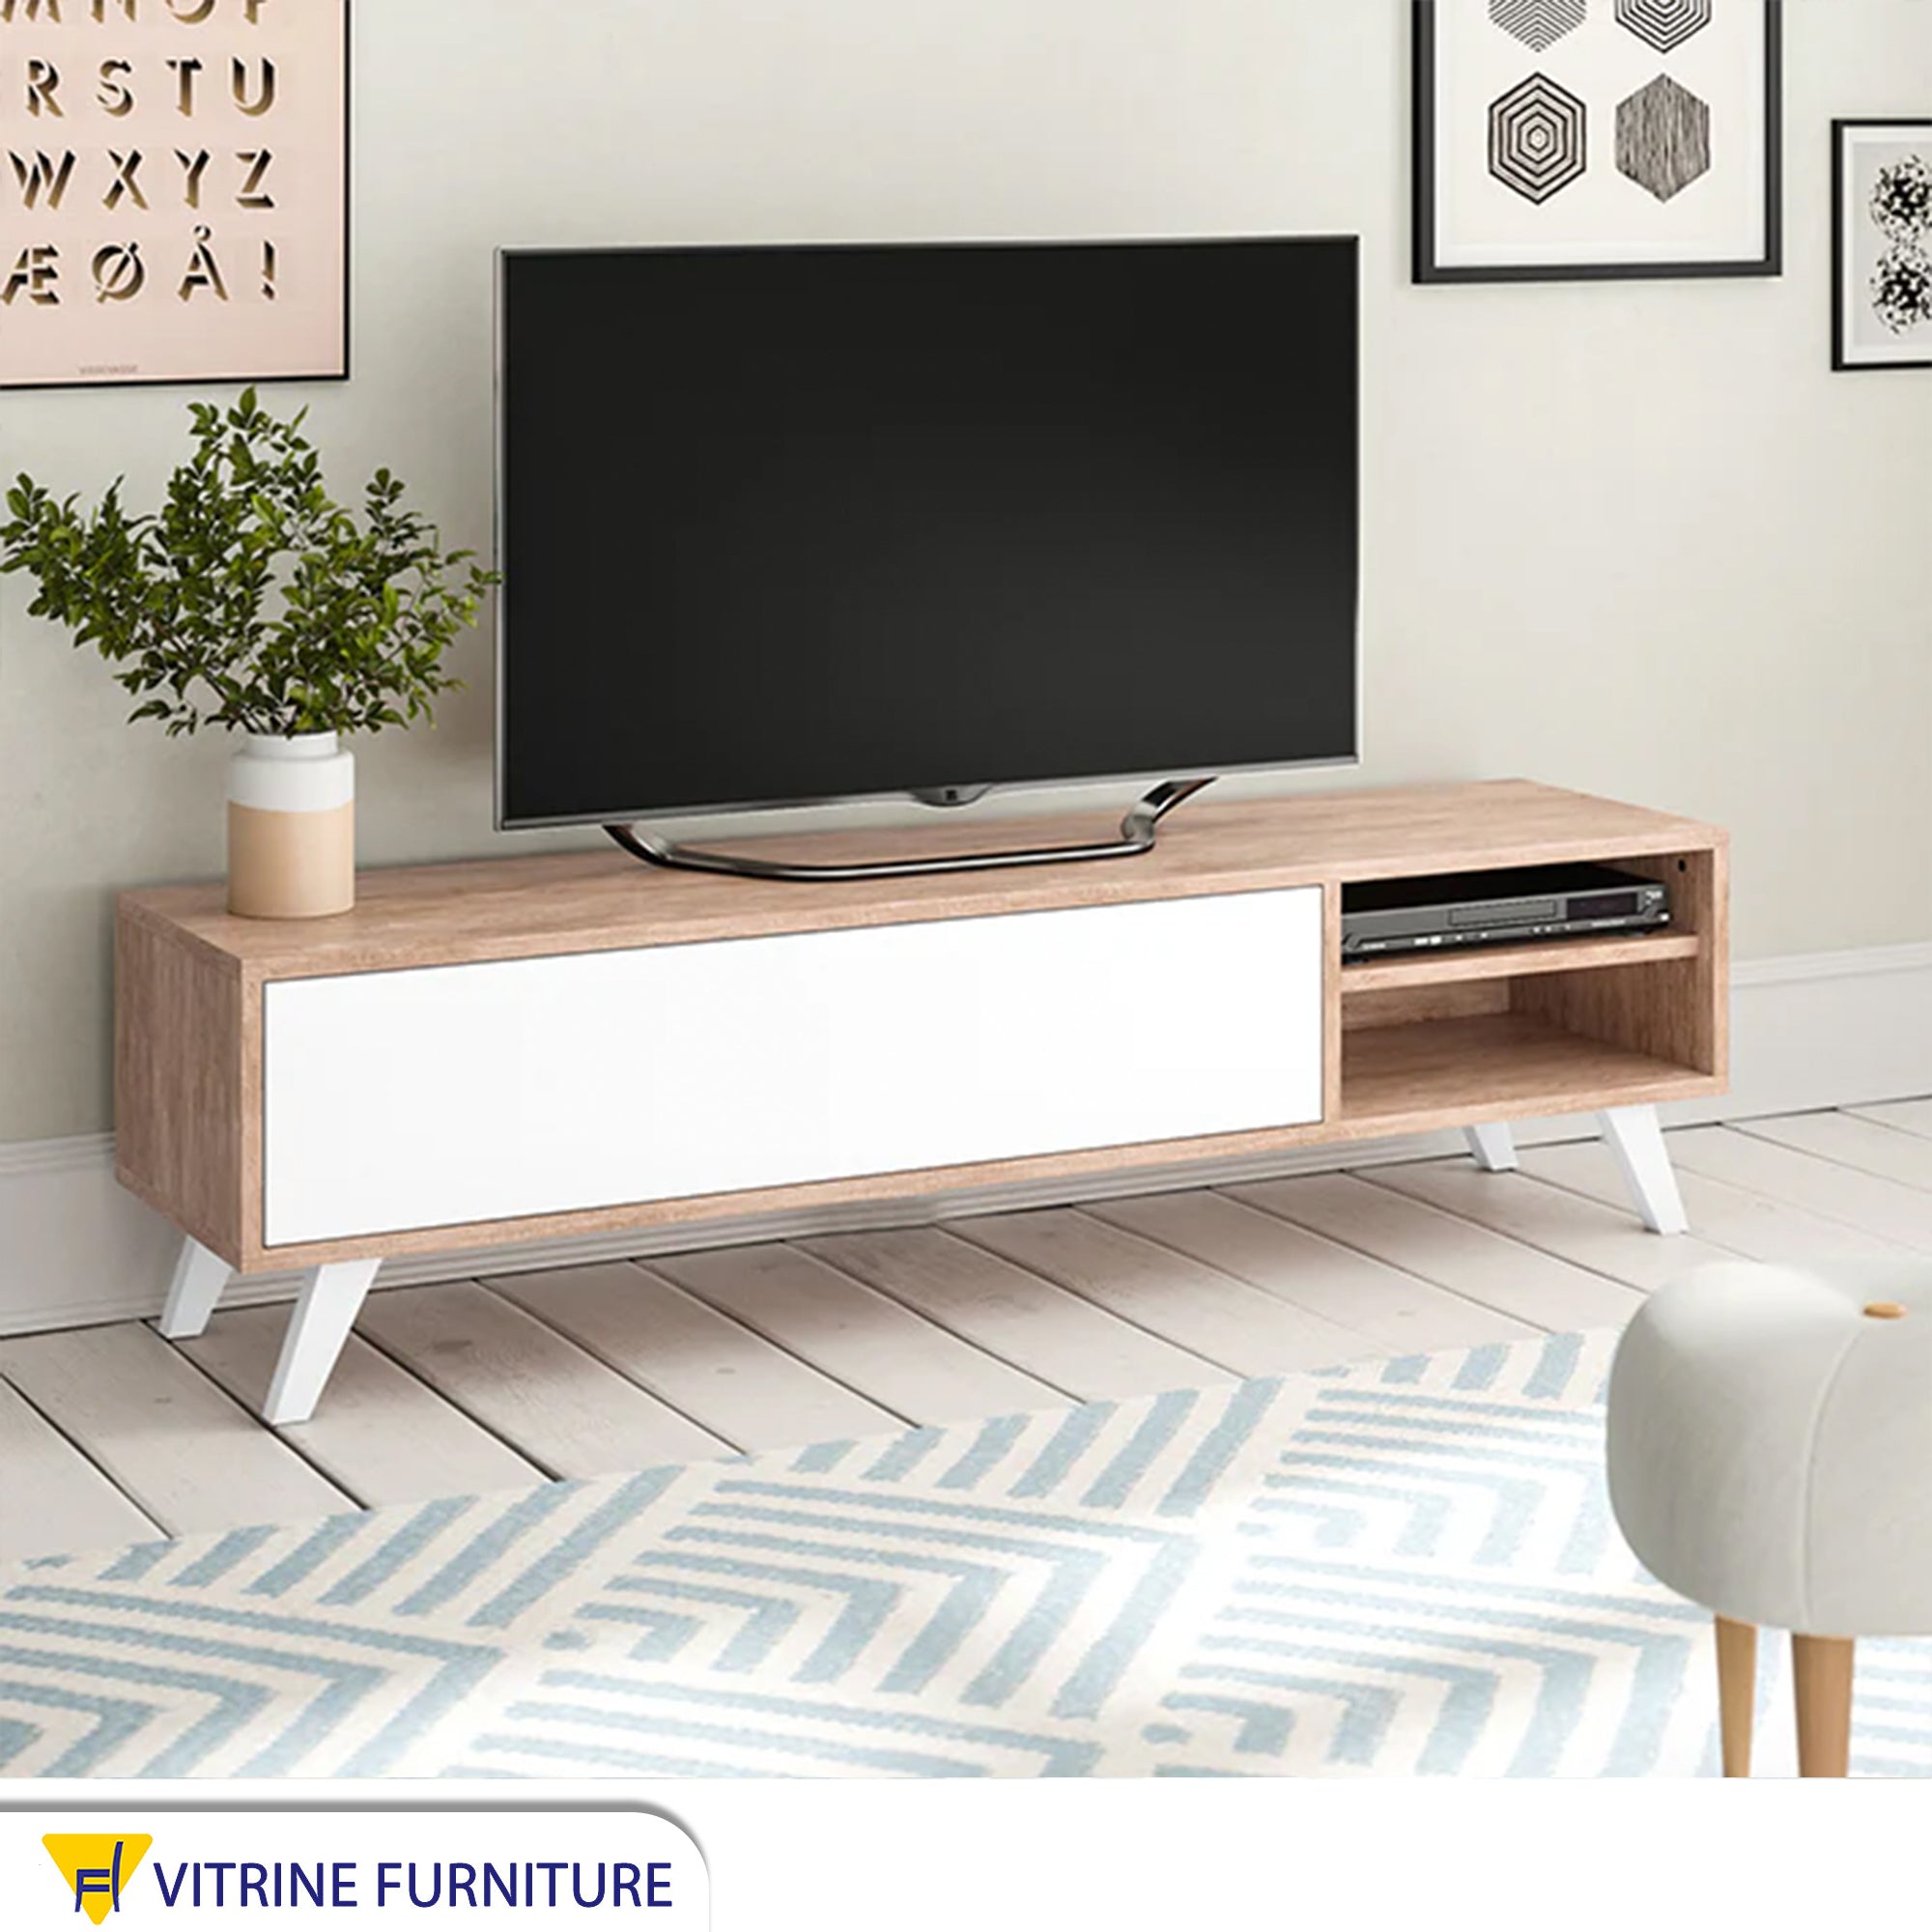 TV table with high legs